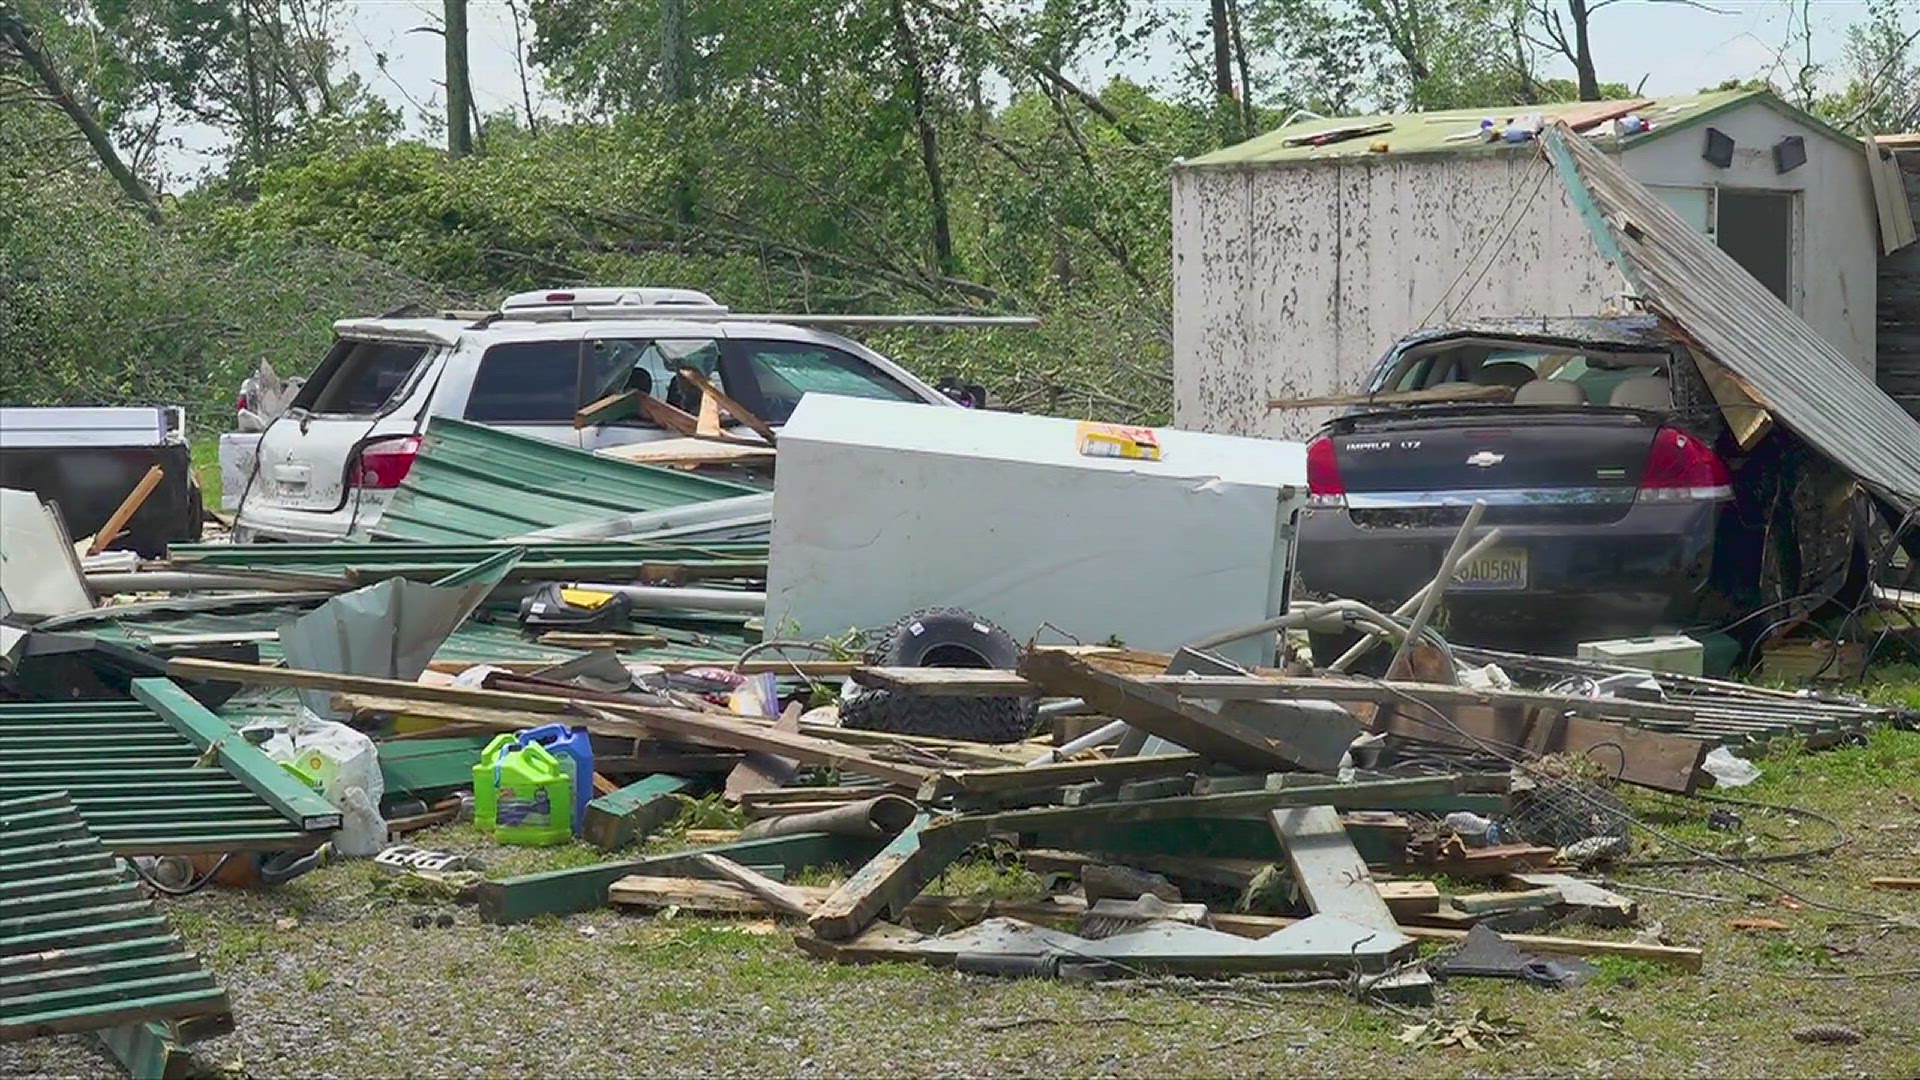 We check in on cleanup efforts in Madison, DeKalb and Jackson Counties. So far five tornadoes between EF-0 and EF-3 strength have been confirmed.